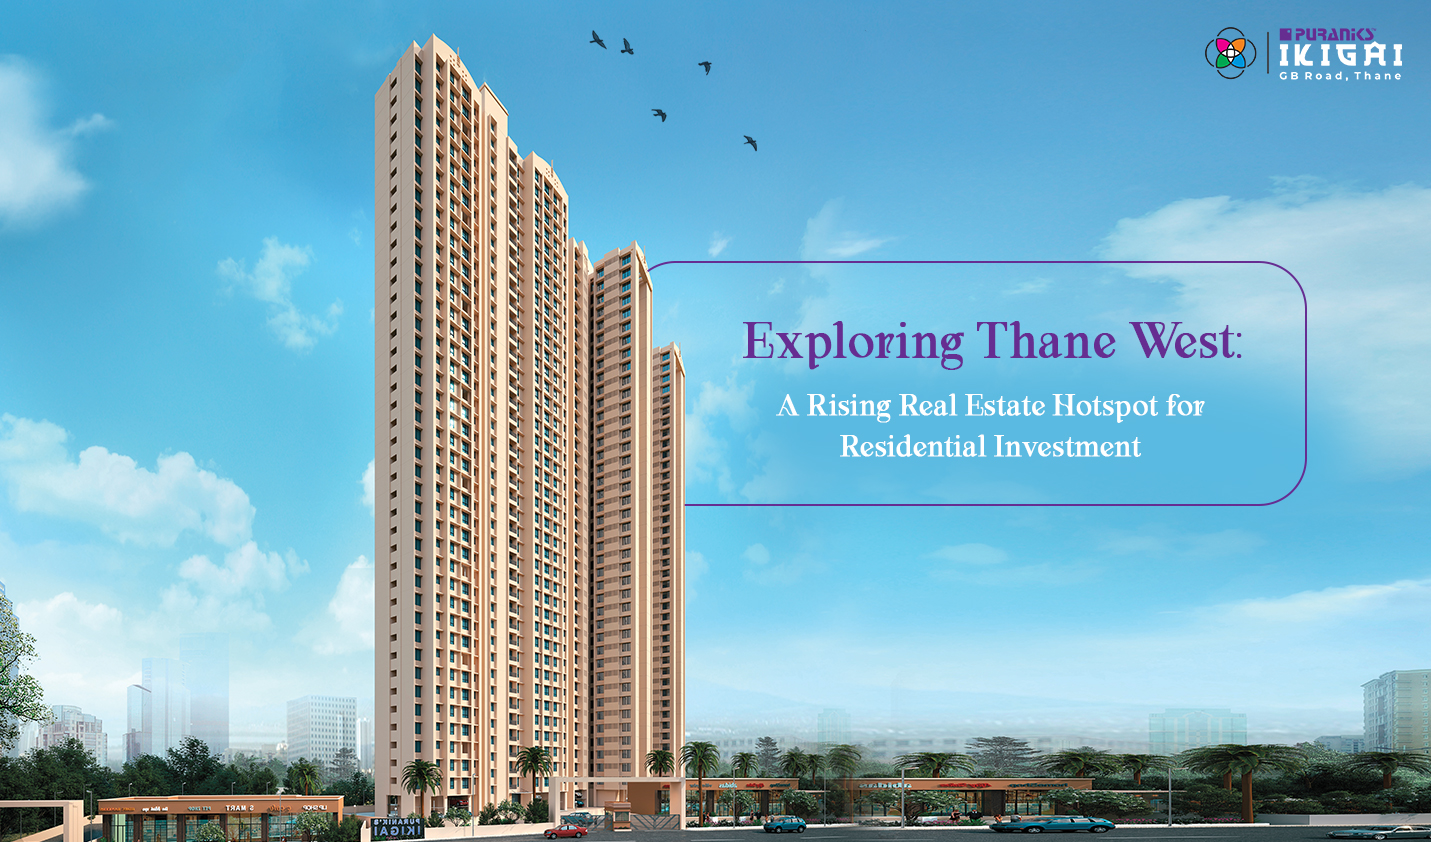 <strong>Exploring Thane West: A Rising Real Estate Hotspot for Residential Investment</strong>